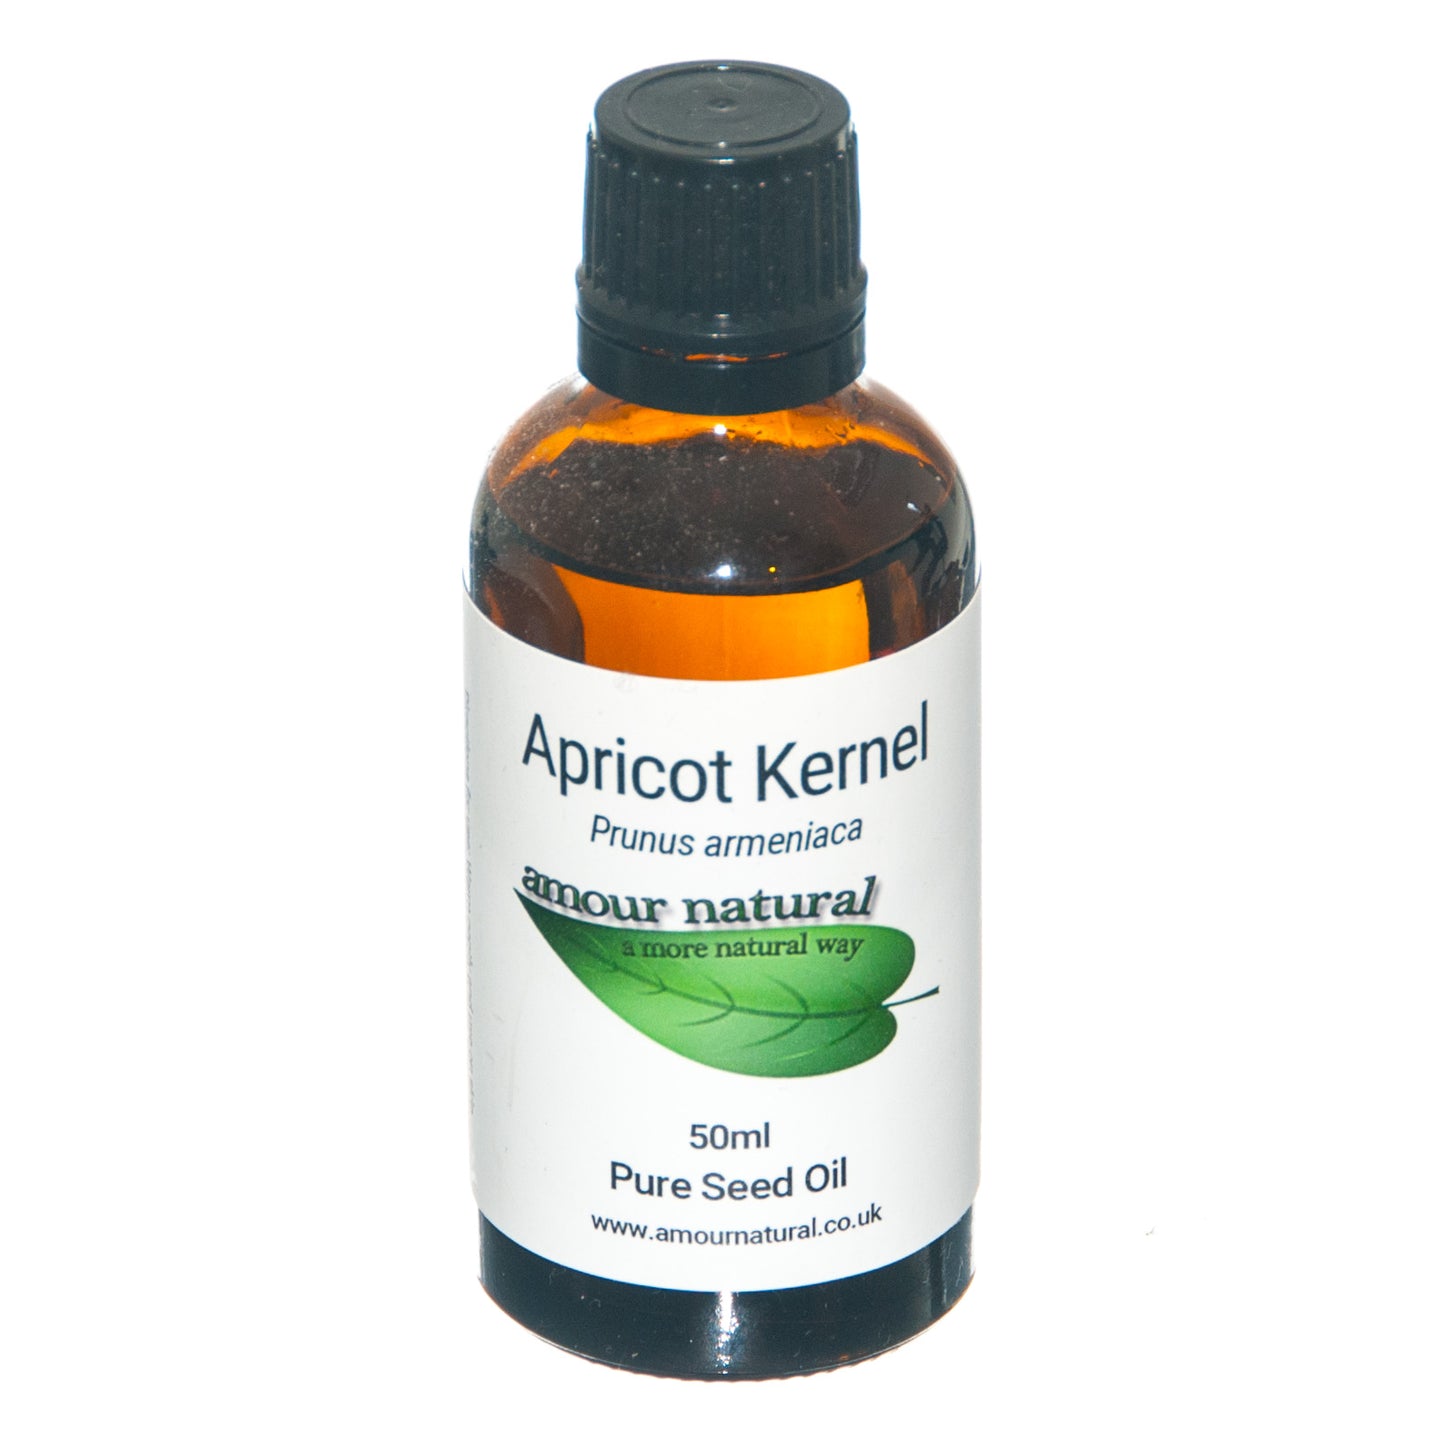 Amour Natural Apricot Kernel Pure Seed Oil 50ml